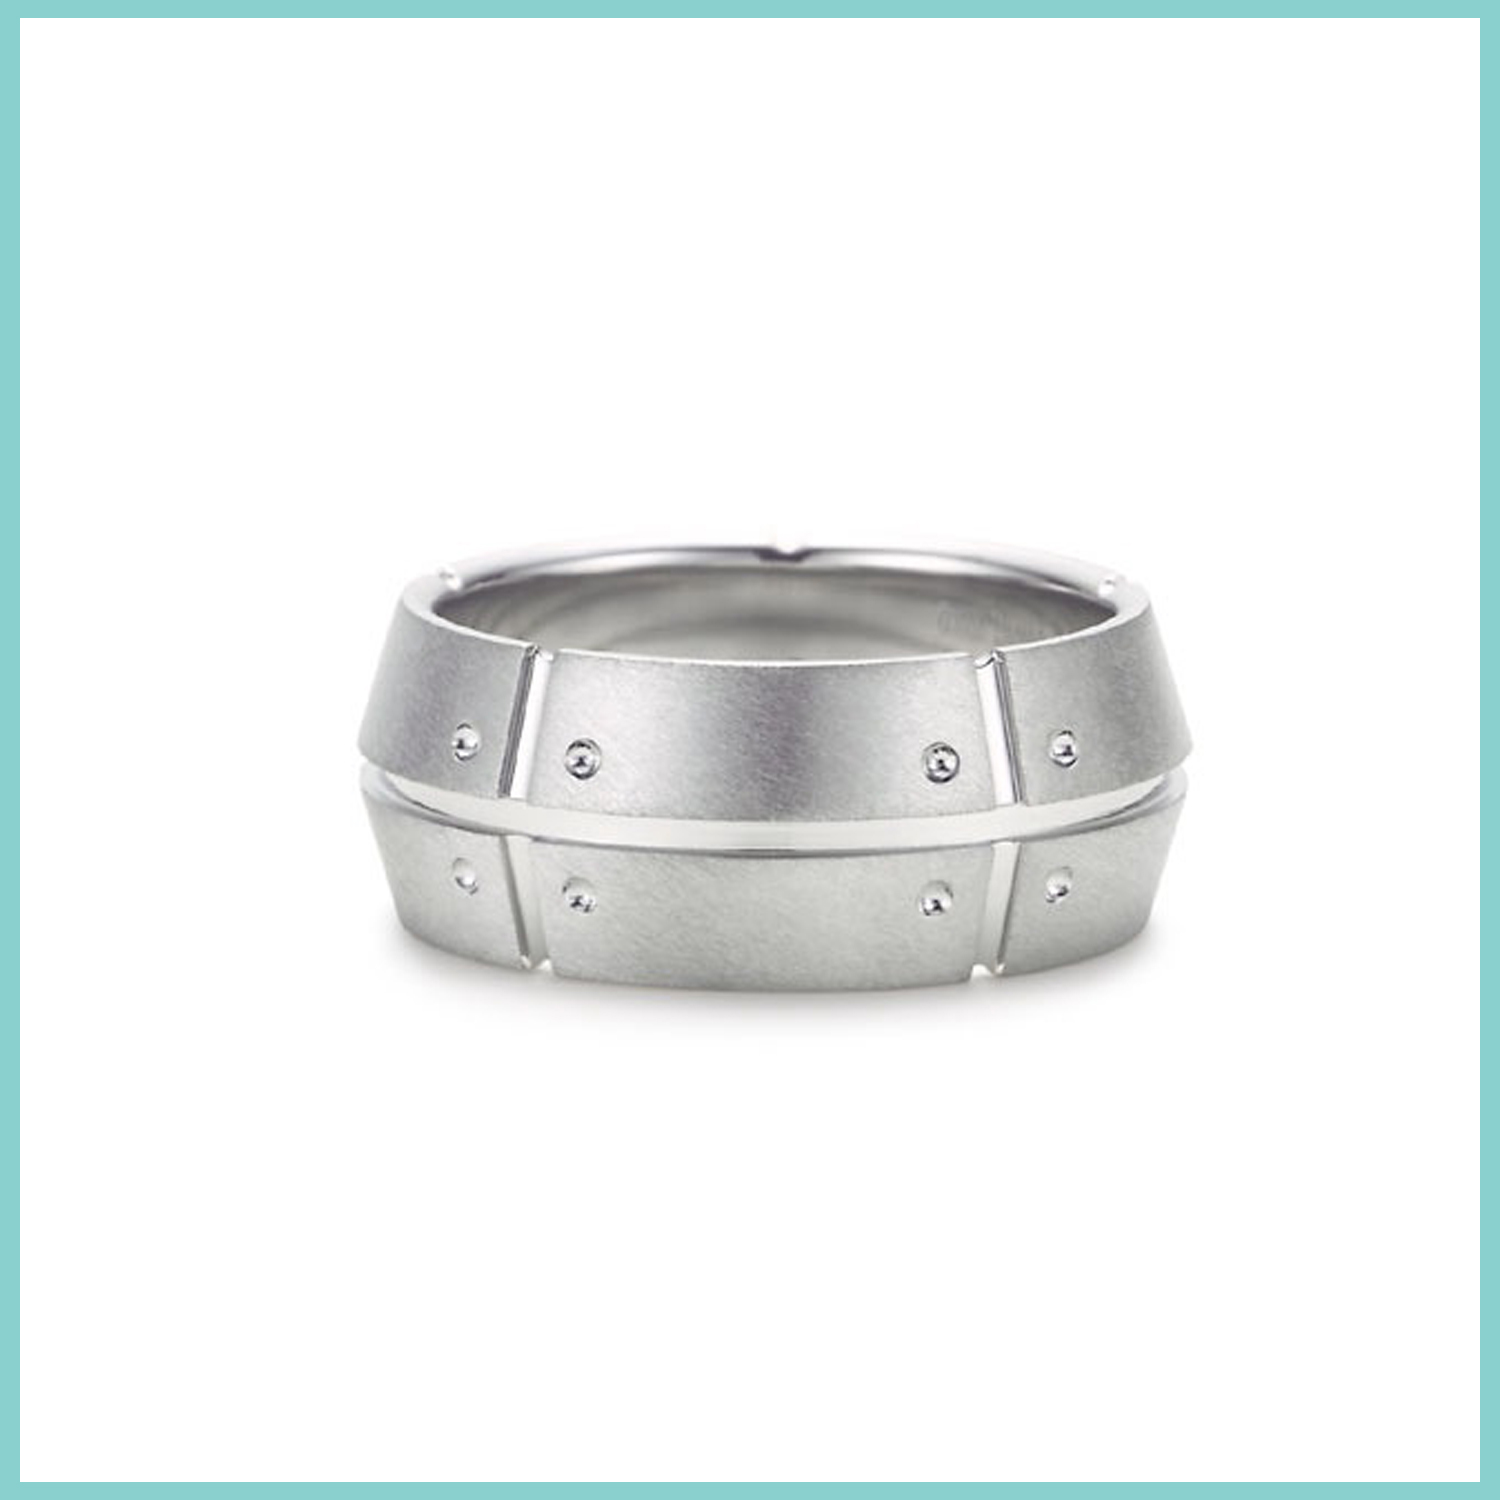 Tiffany and & Co. Streamerica 18k 750 Mens White Gold Double Ring rivets 2002 Wedding Band 2002 Standing